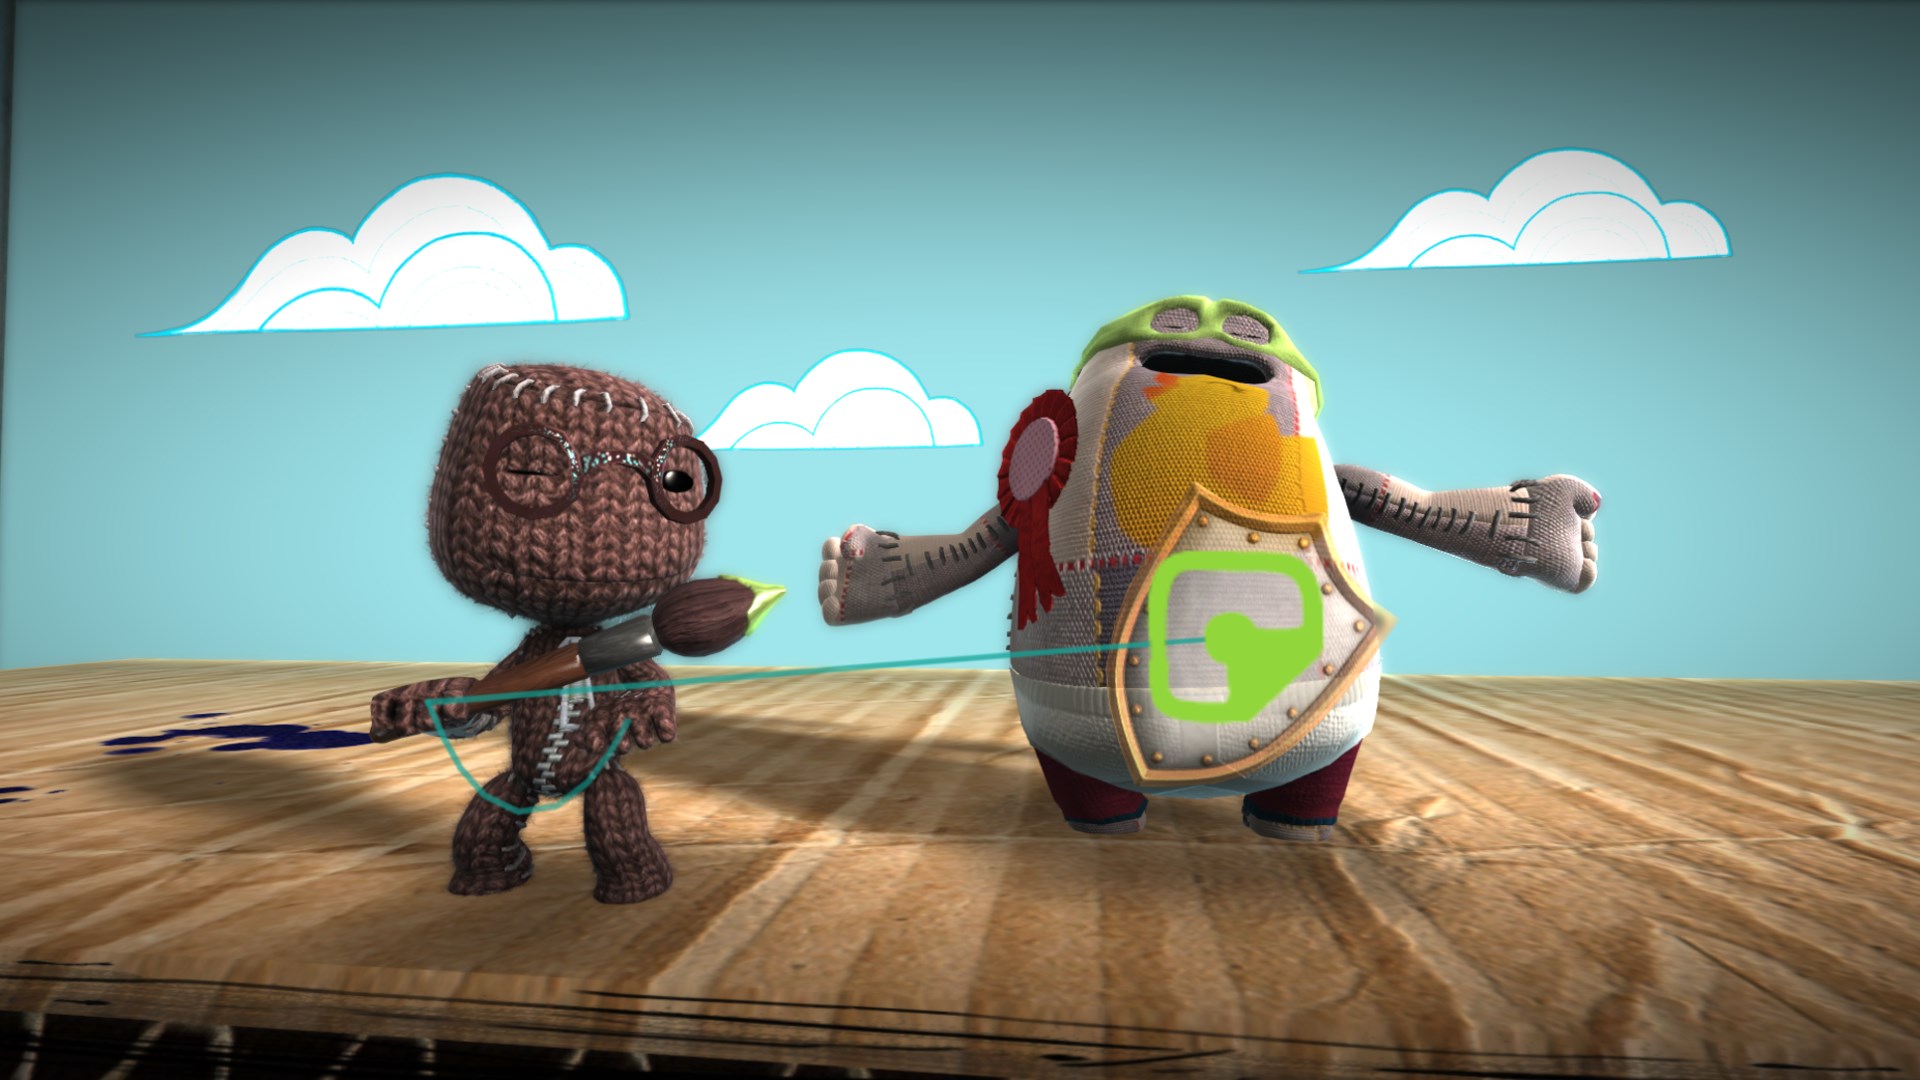 Make your own trailers in LittleBigPlanet 3